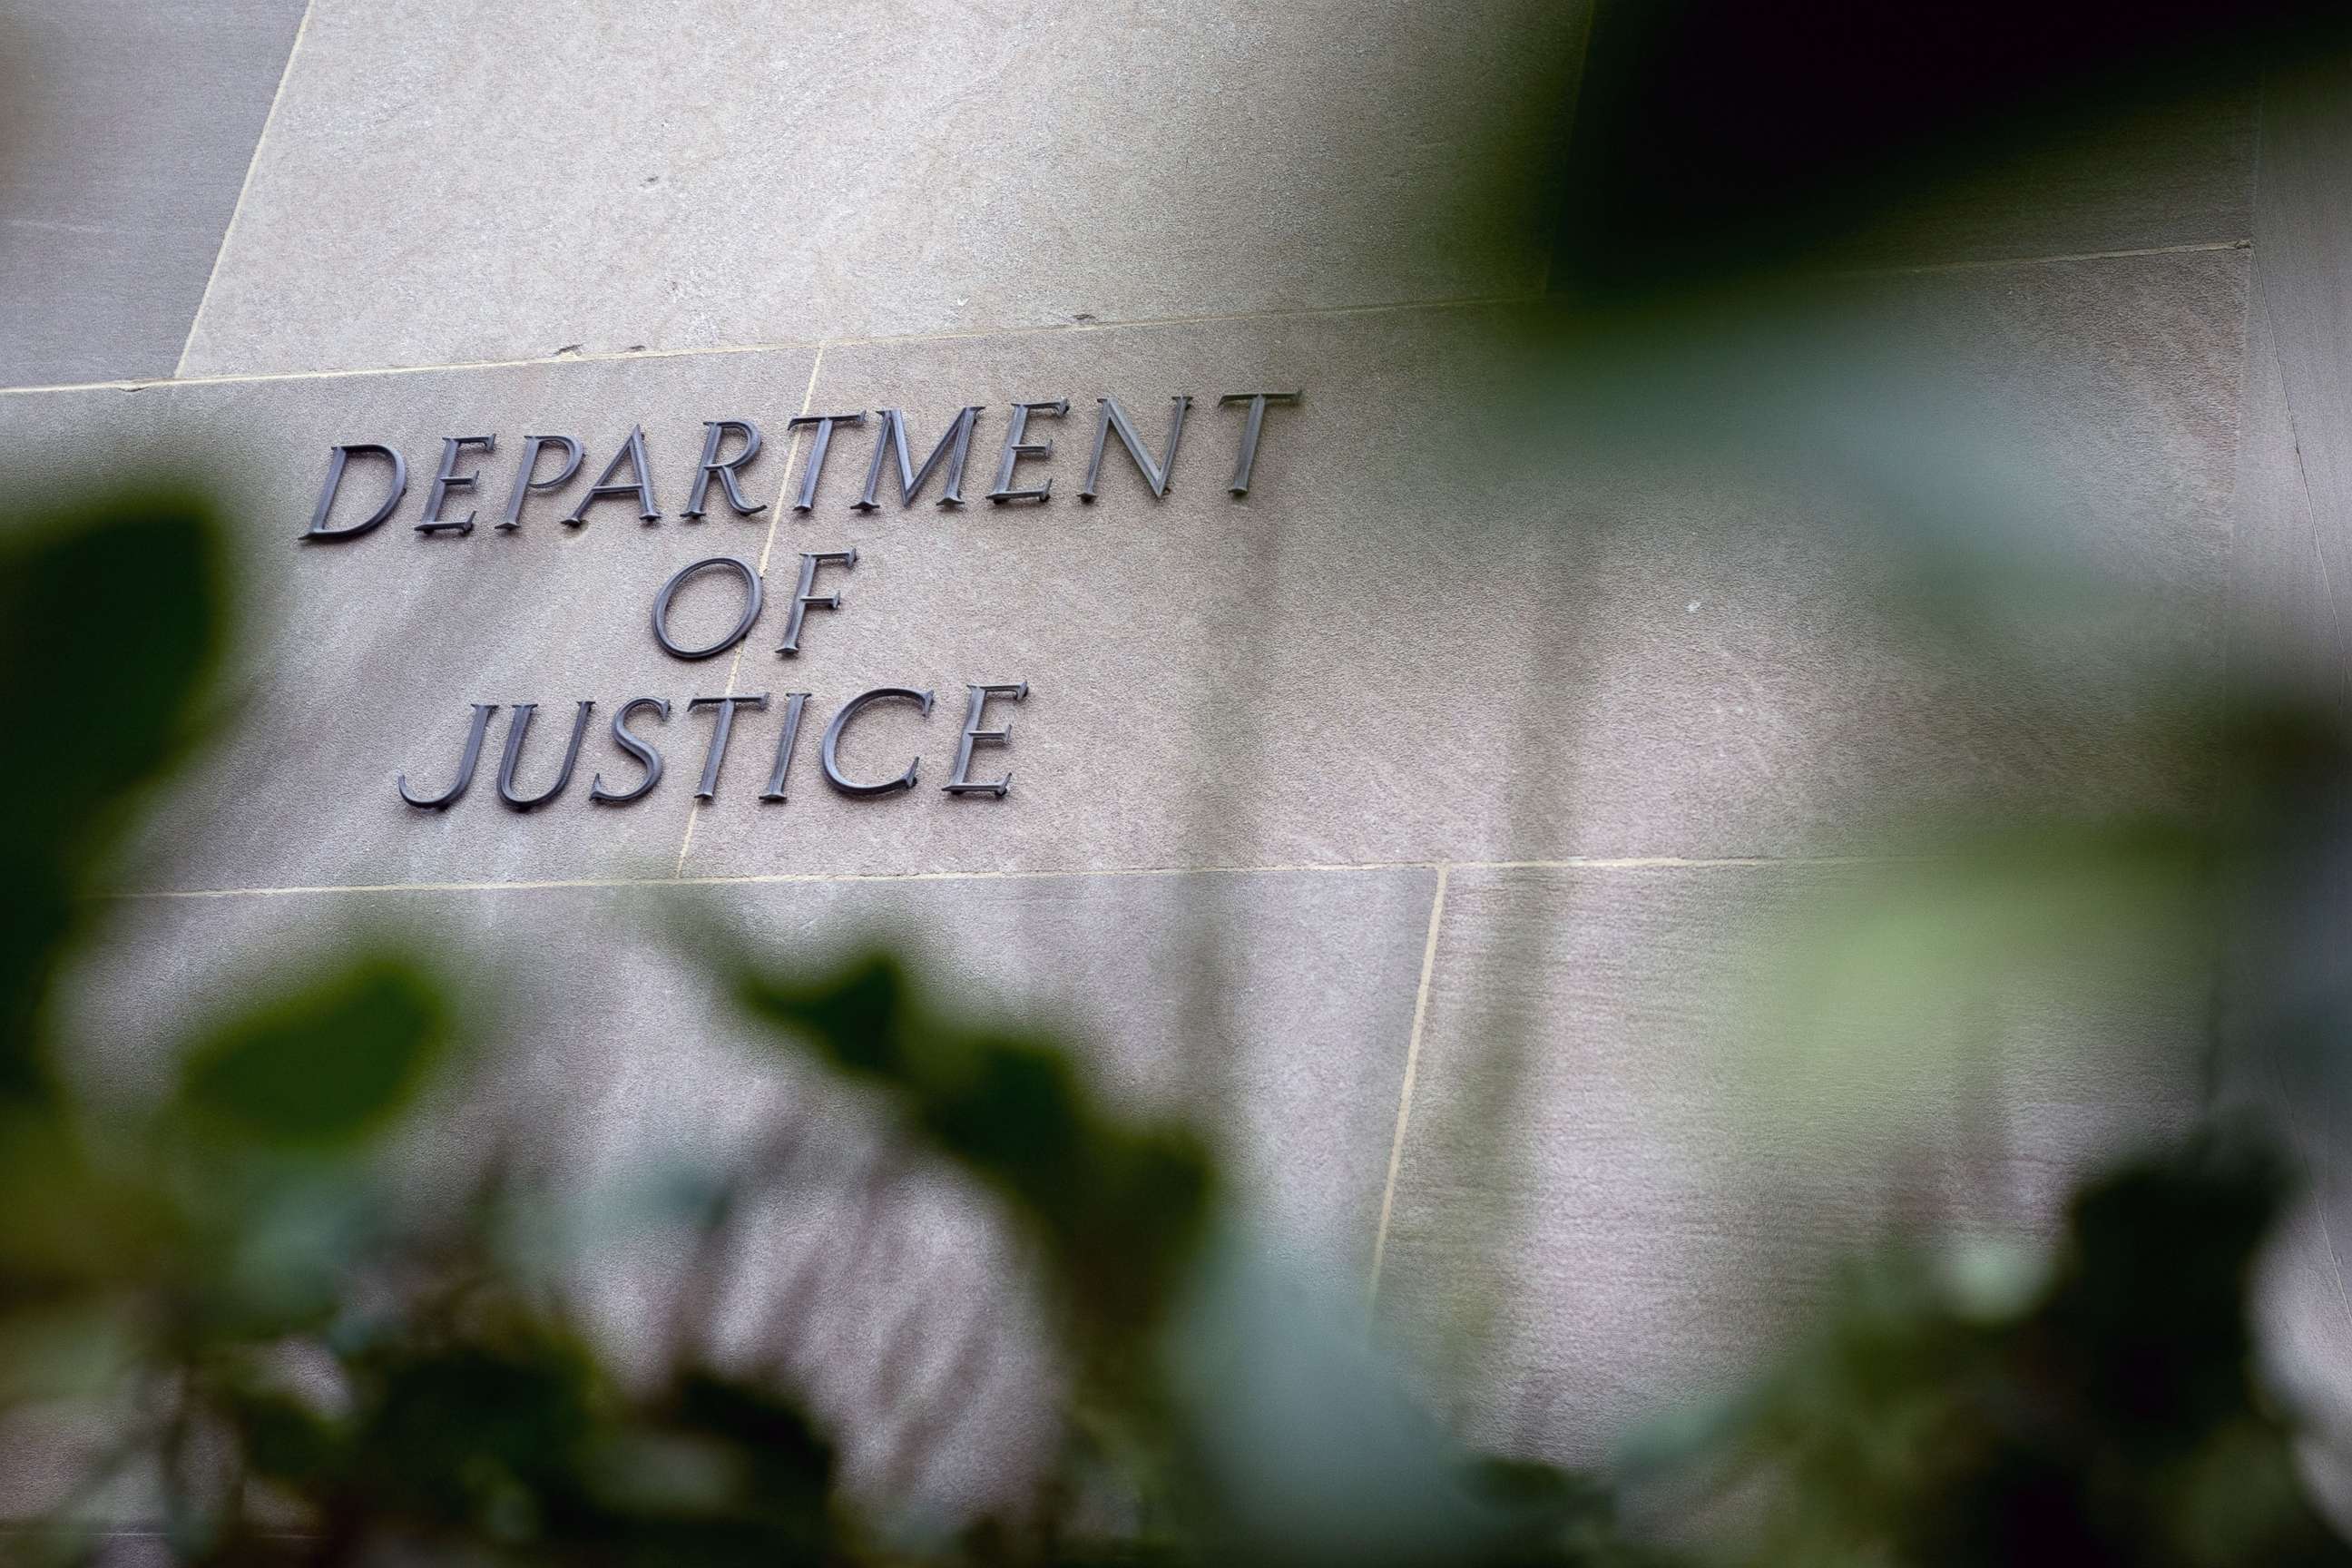 PHOTO: In this Dec. 4, 2020, file photo, the Department of Justice building in Washington, D.C., is shown.